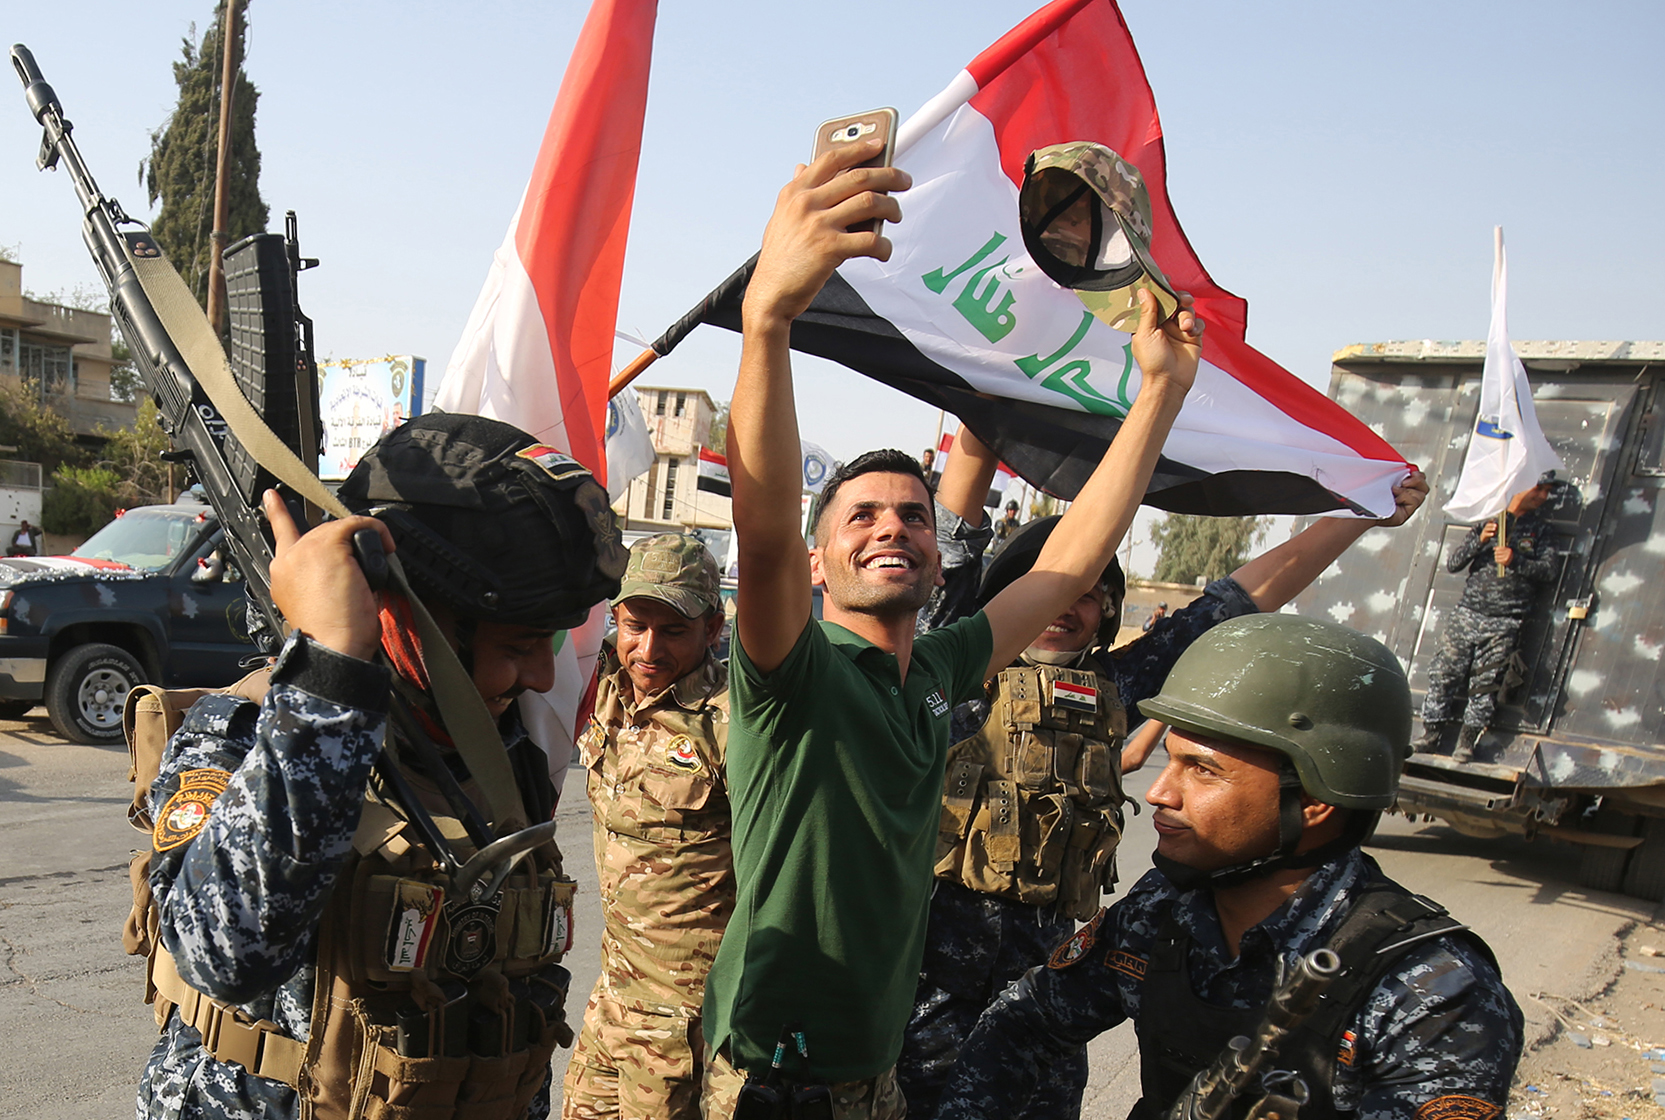 PHOTO: An Iraqi man takes a selfie with federal police members as they celebrate in the Old City of Mosul on July 9, 2017 after the government's announcement of the "liberation" of the embattled city.
